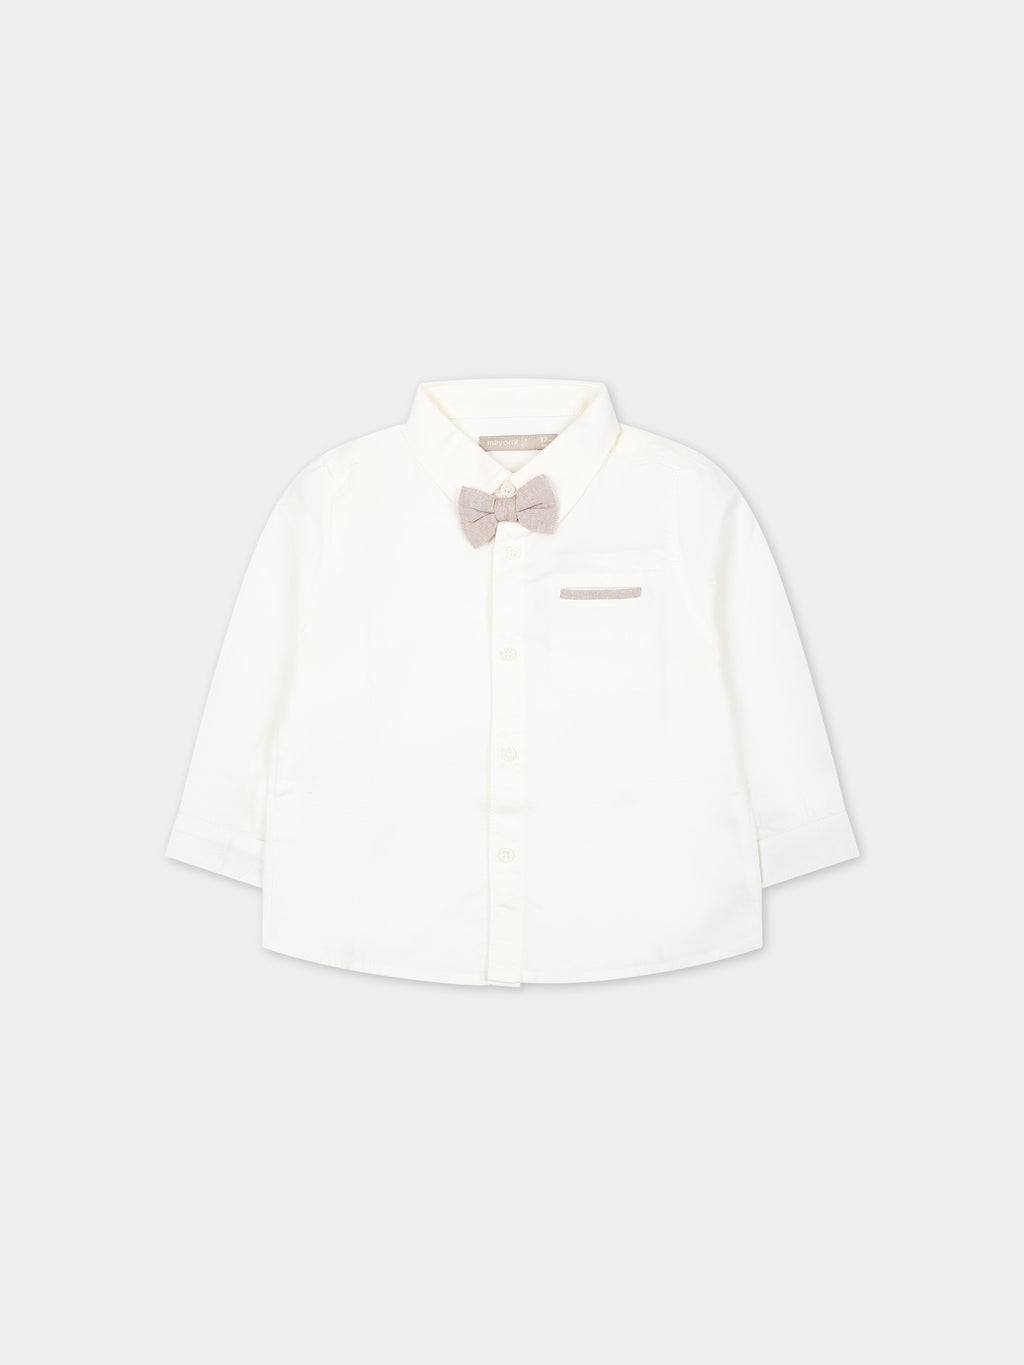 Ivory shirt for baby boy with bow tie